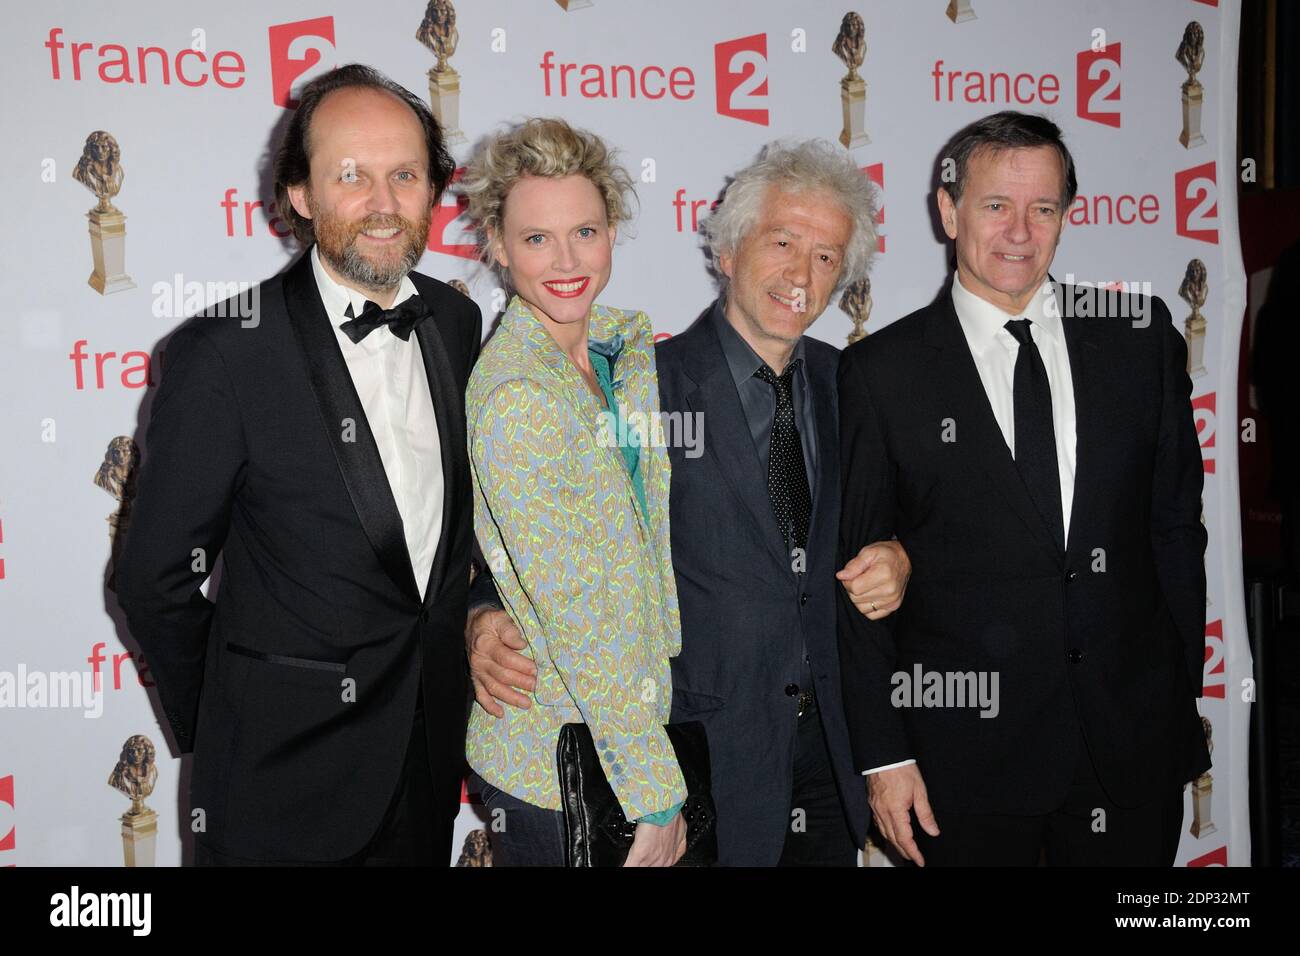 Francis Huster, Jean-Luc Moreau, Jean-Marc Dumontet attending the 27th  Molieres Theater Awards ceremony held at the Folies Bergere in Paris,  France on April 27, 2015. Photo by Alban Wyters/ABACAPRESS.COM Stock Photo -